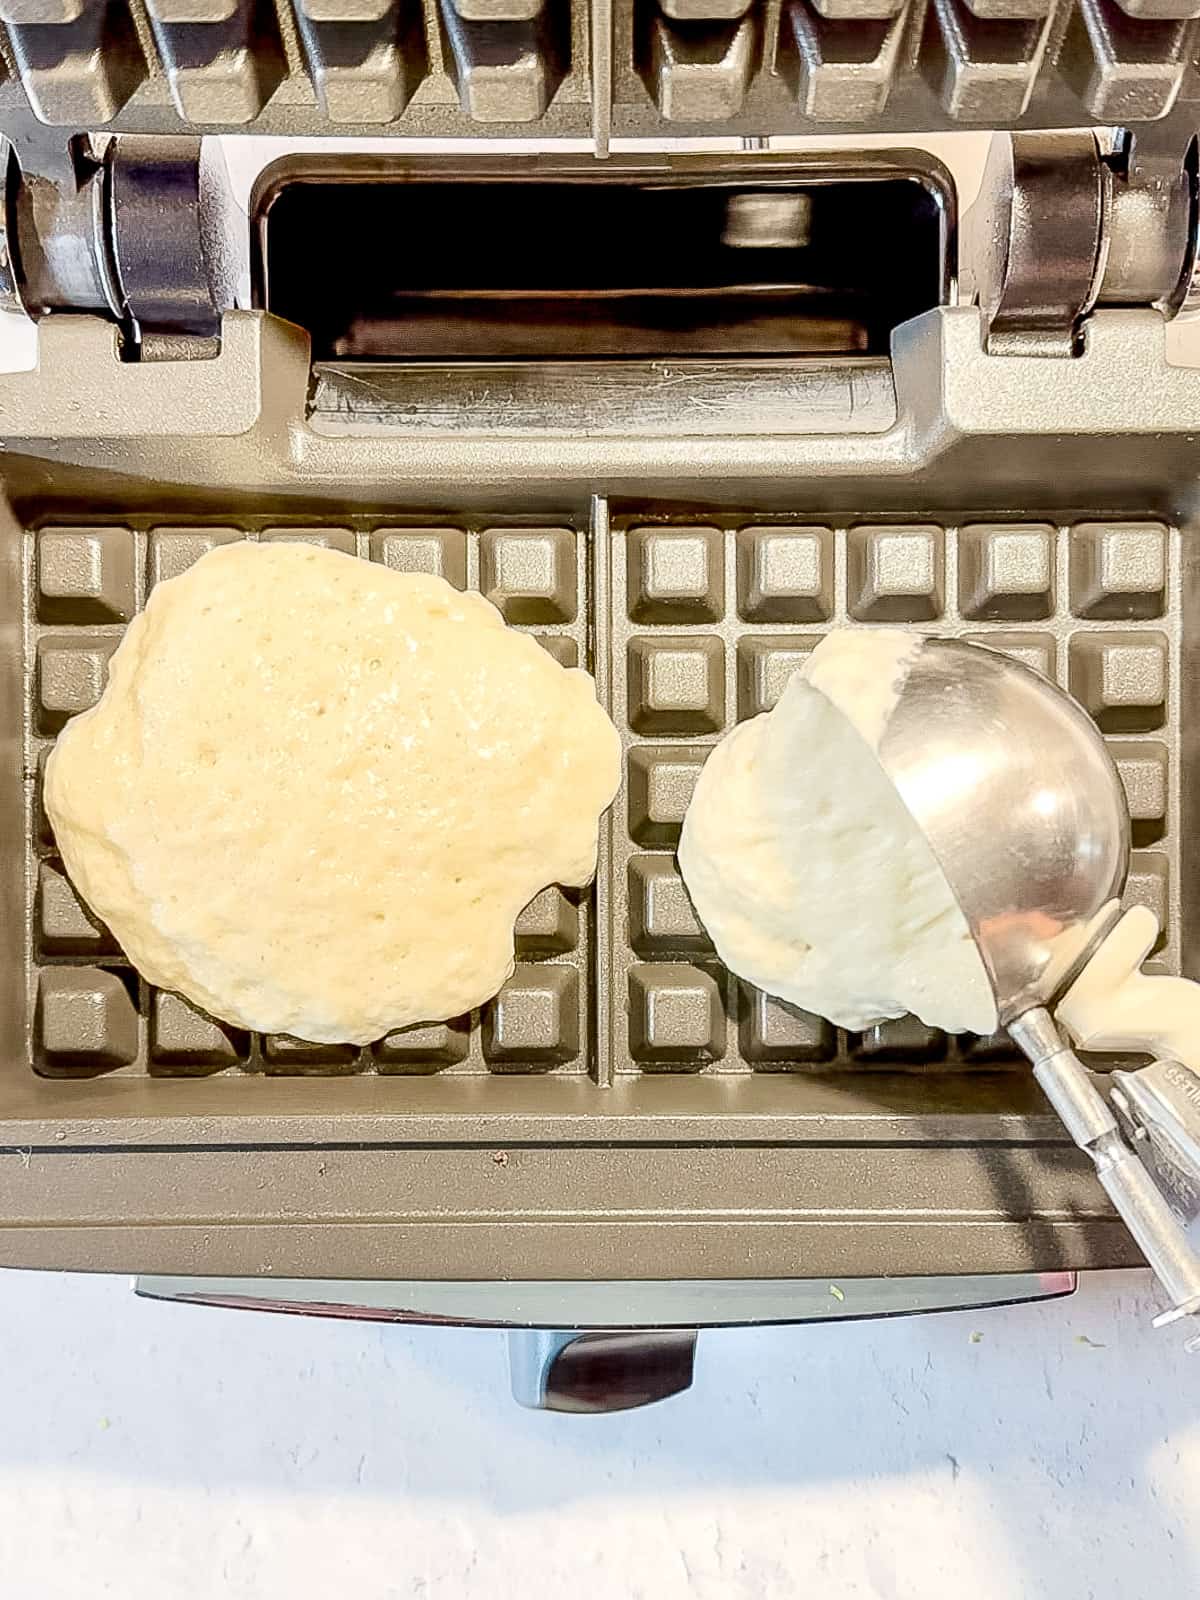 Scooping waffle batter into waffle maker.